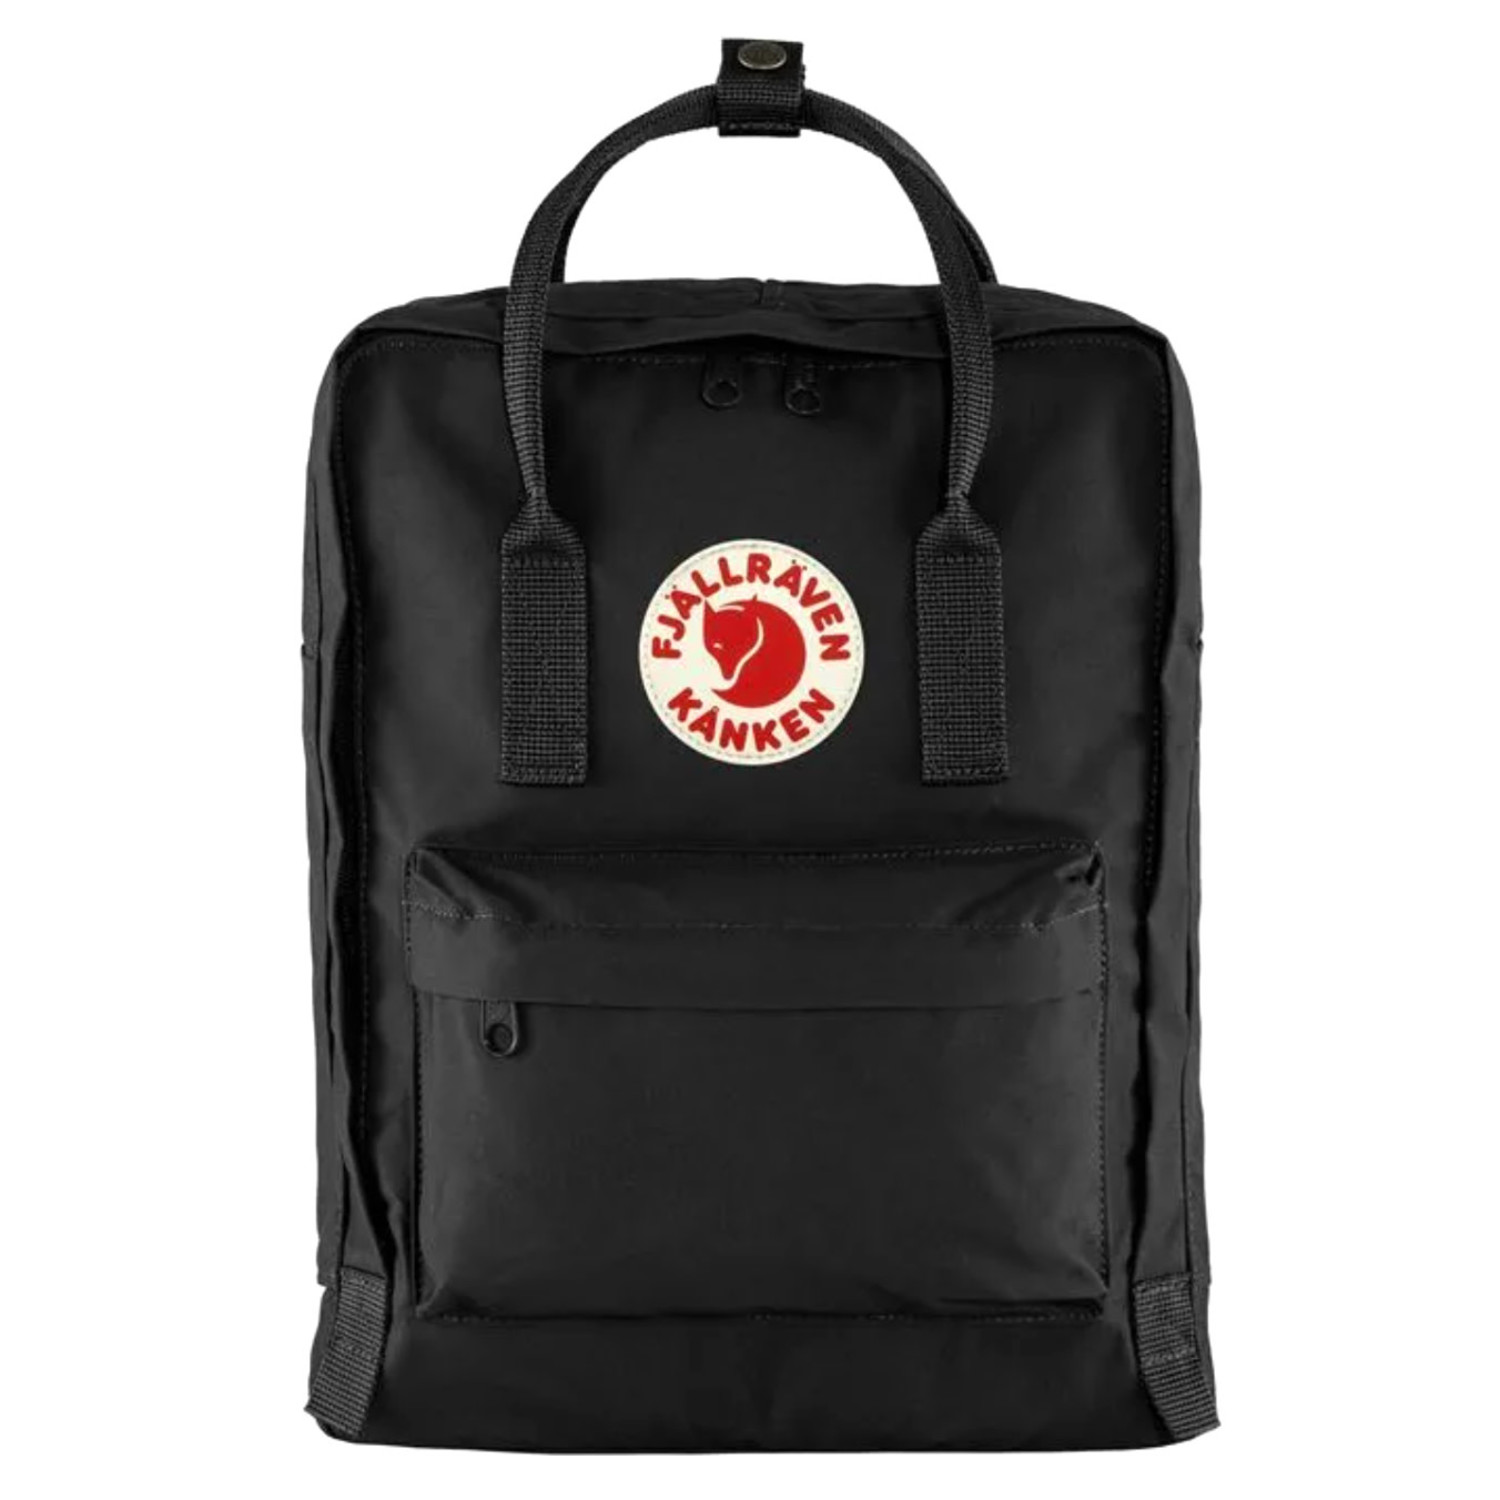 Suffix Qualification Theseus Kanken Backpack Black - Lucky Wang nyc